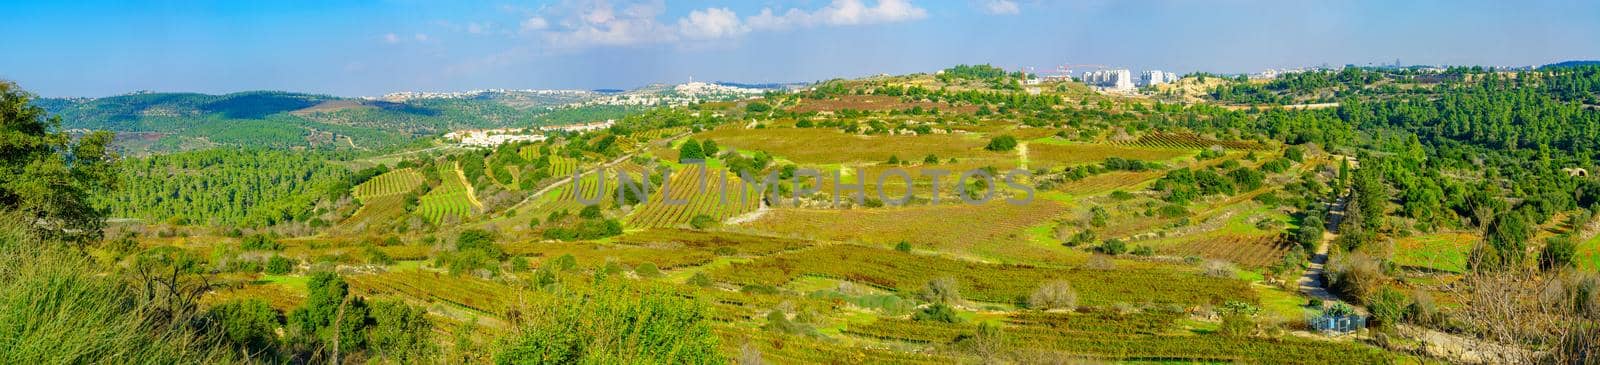 Panoramic view of landscape and vineyards in the Jerusalem Hills by RnDmS